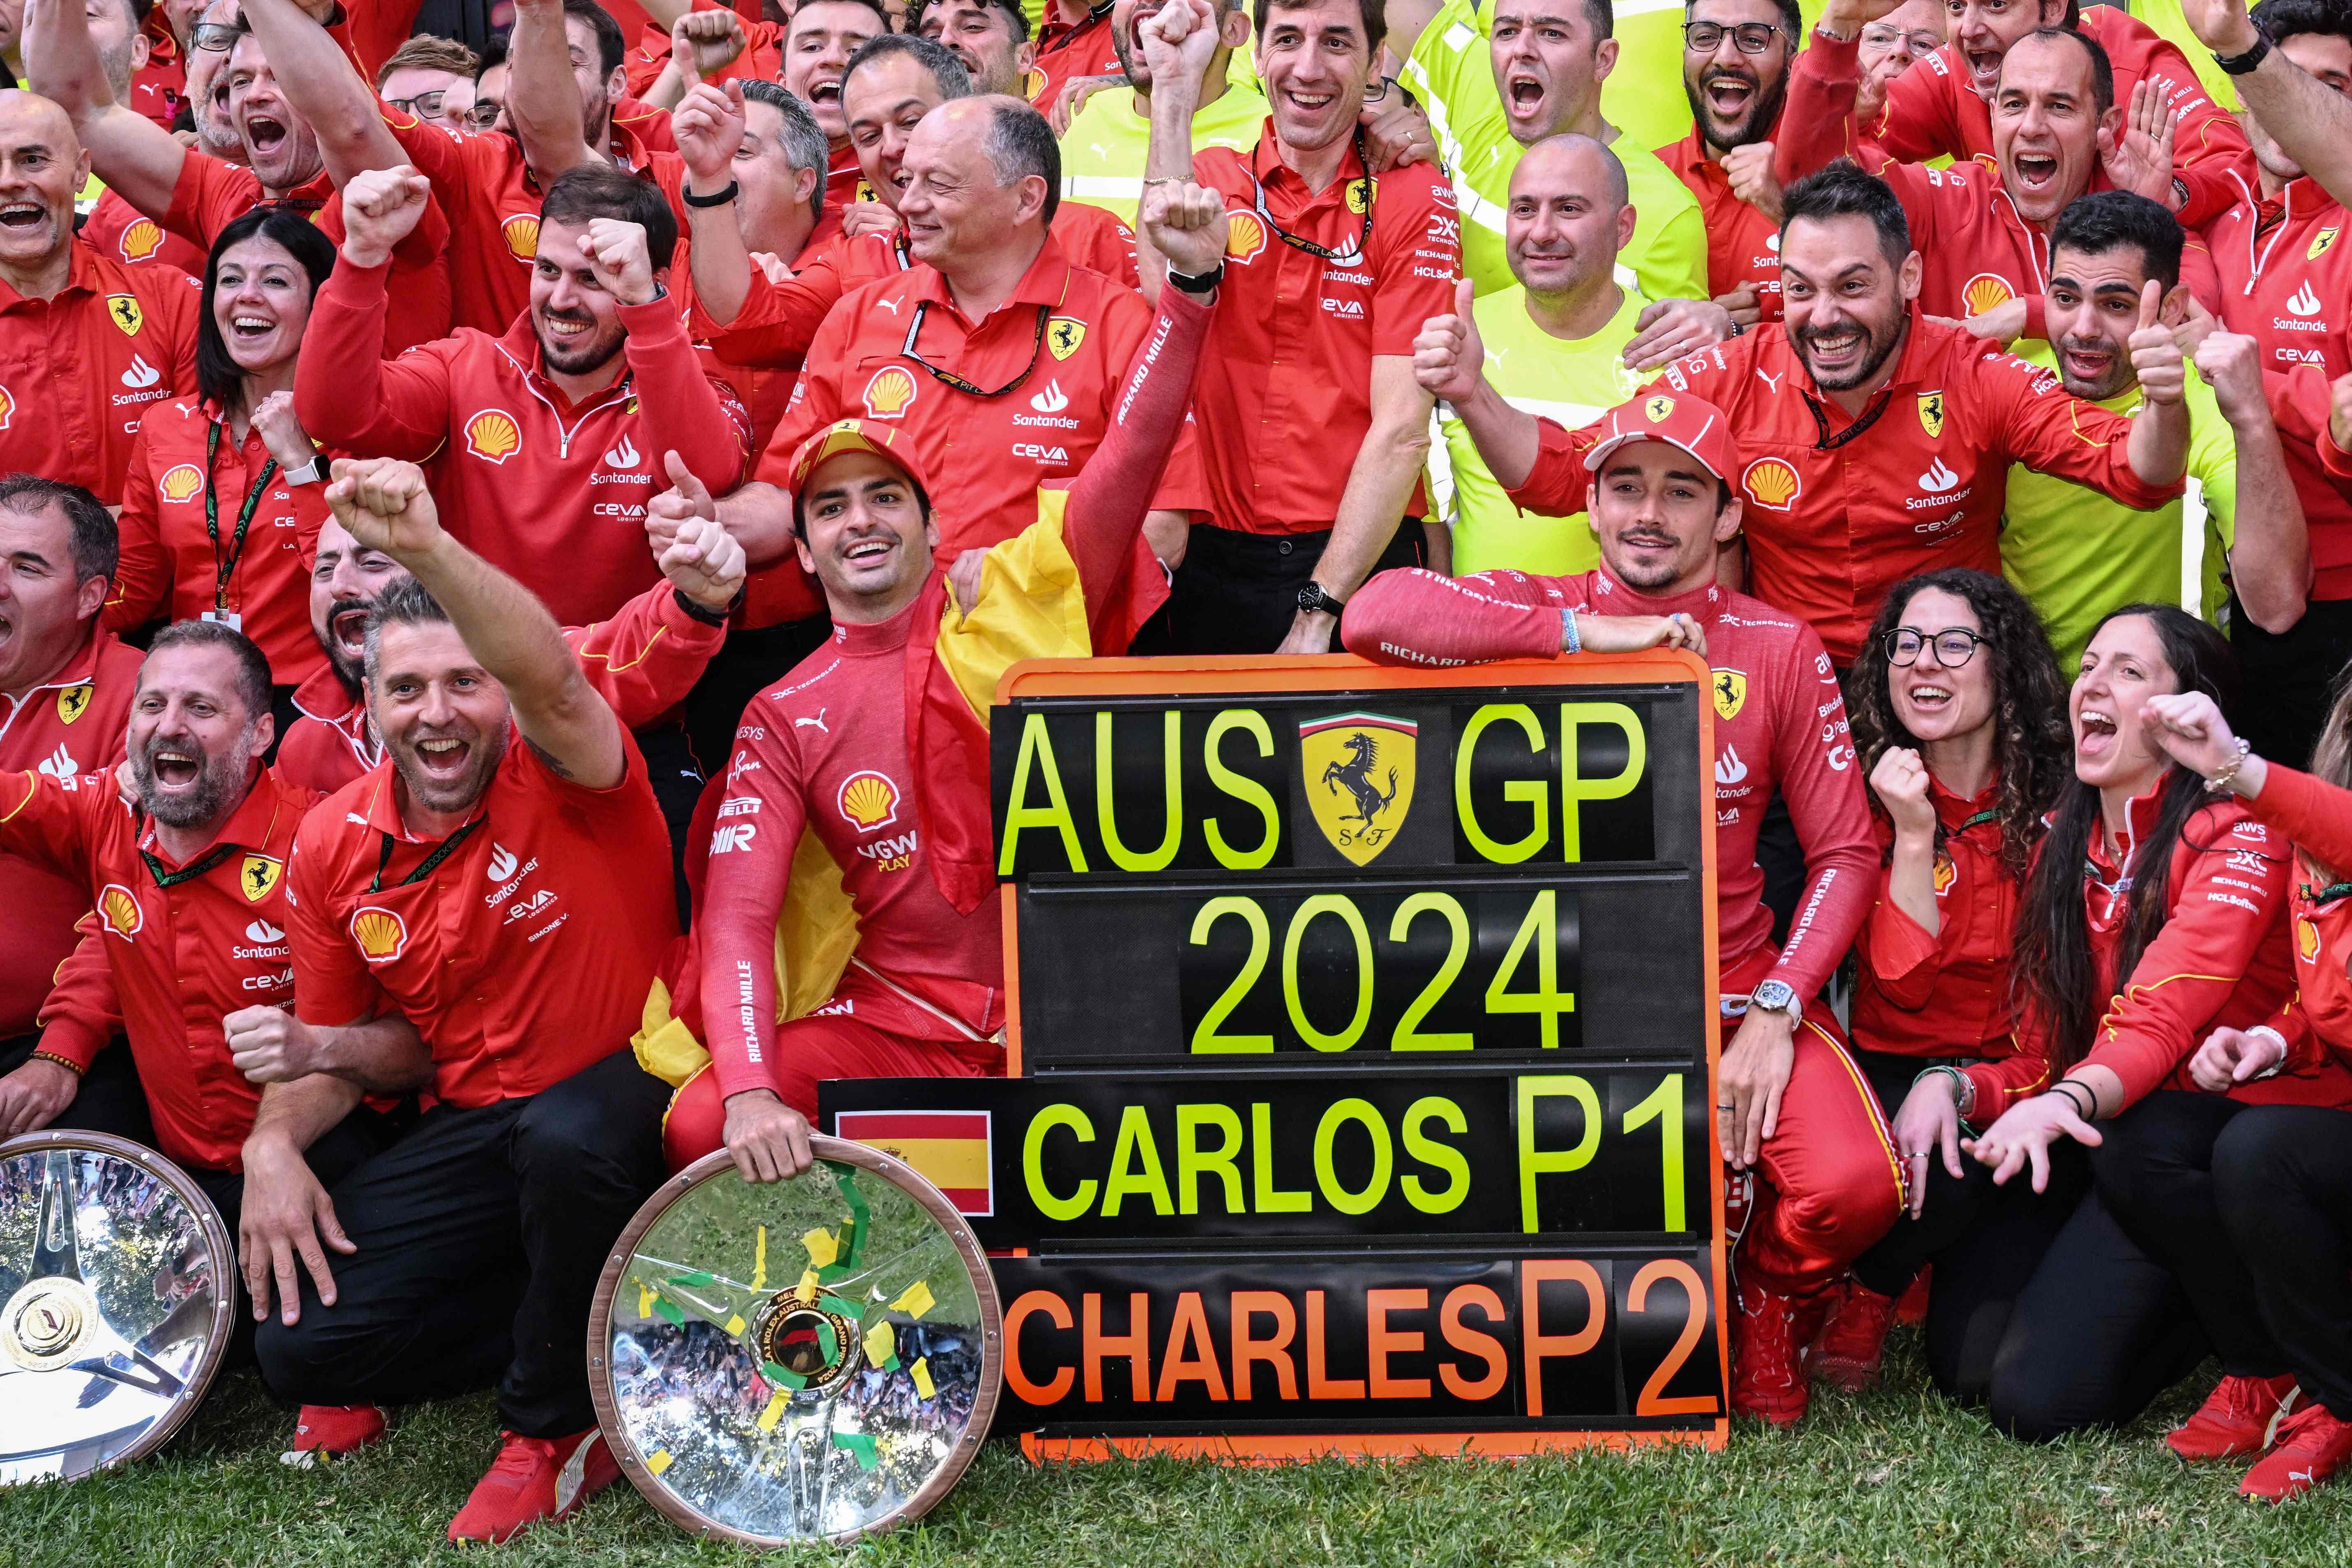 Ferrari’s one-two finish in Melbourne gives Formula One a much-needed lift